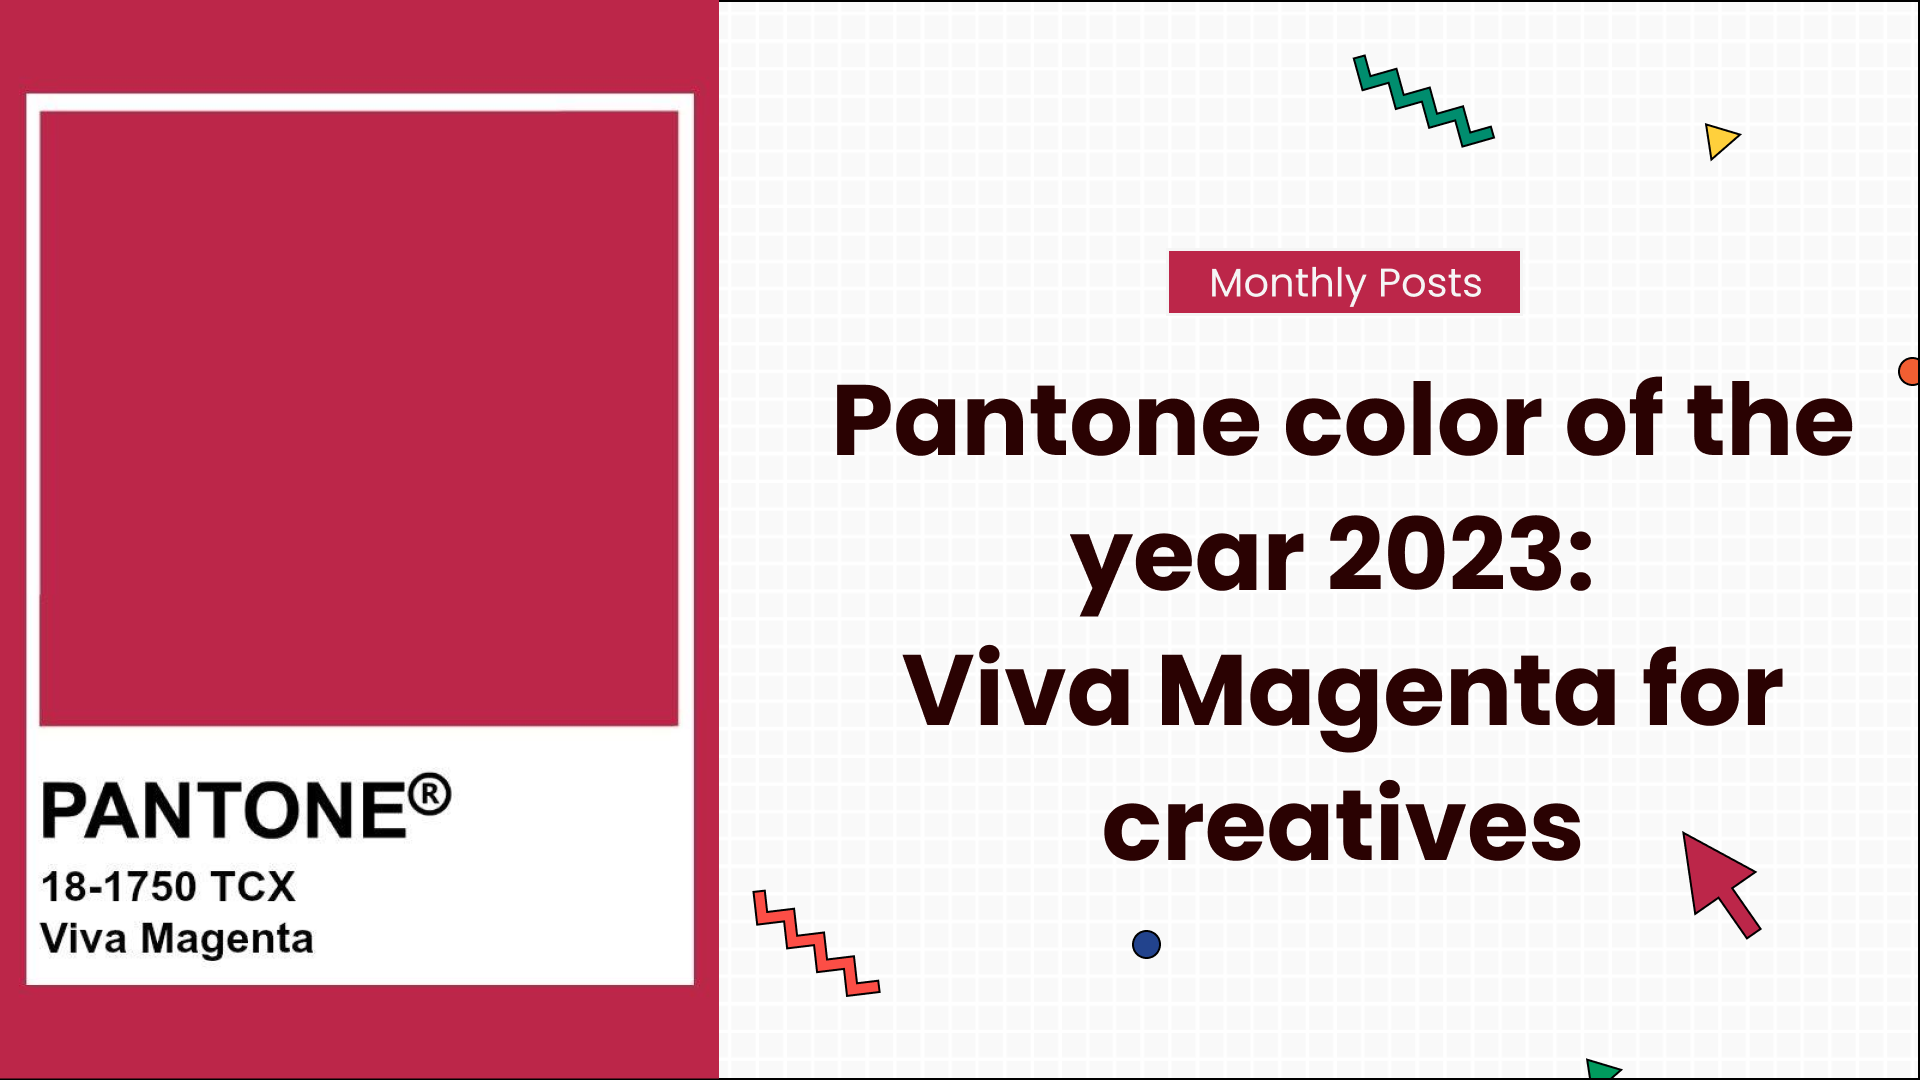 Announcing The COLOR OF THE YEAR 2023 Pantone Viva Magenta 18-1750